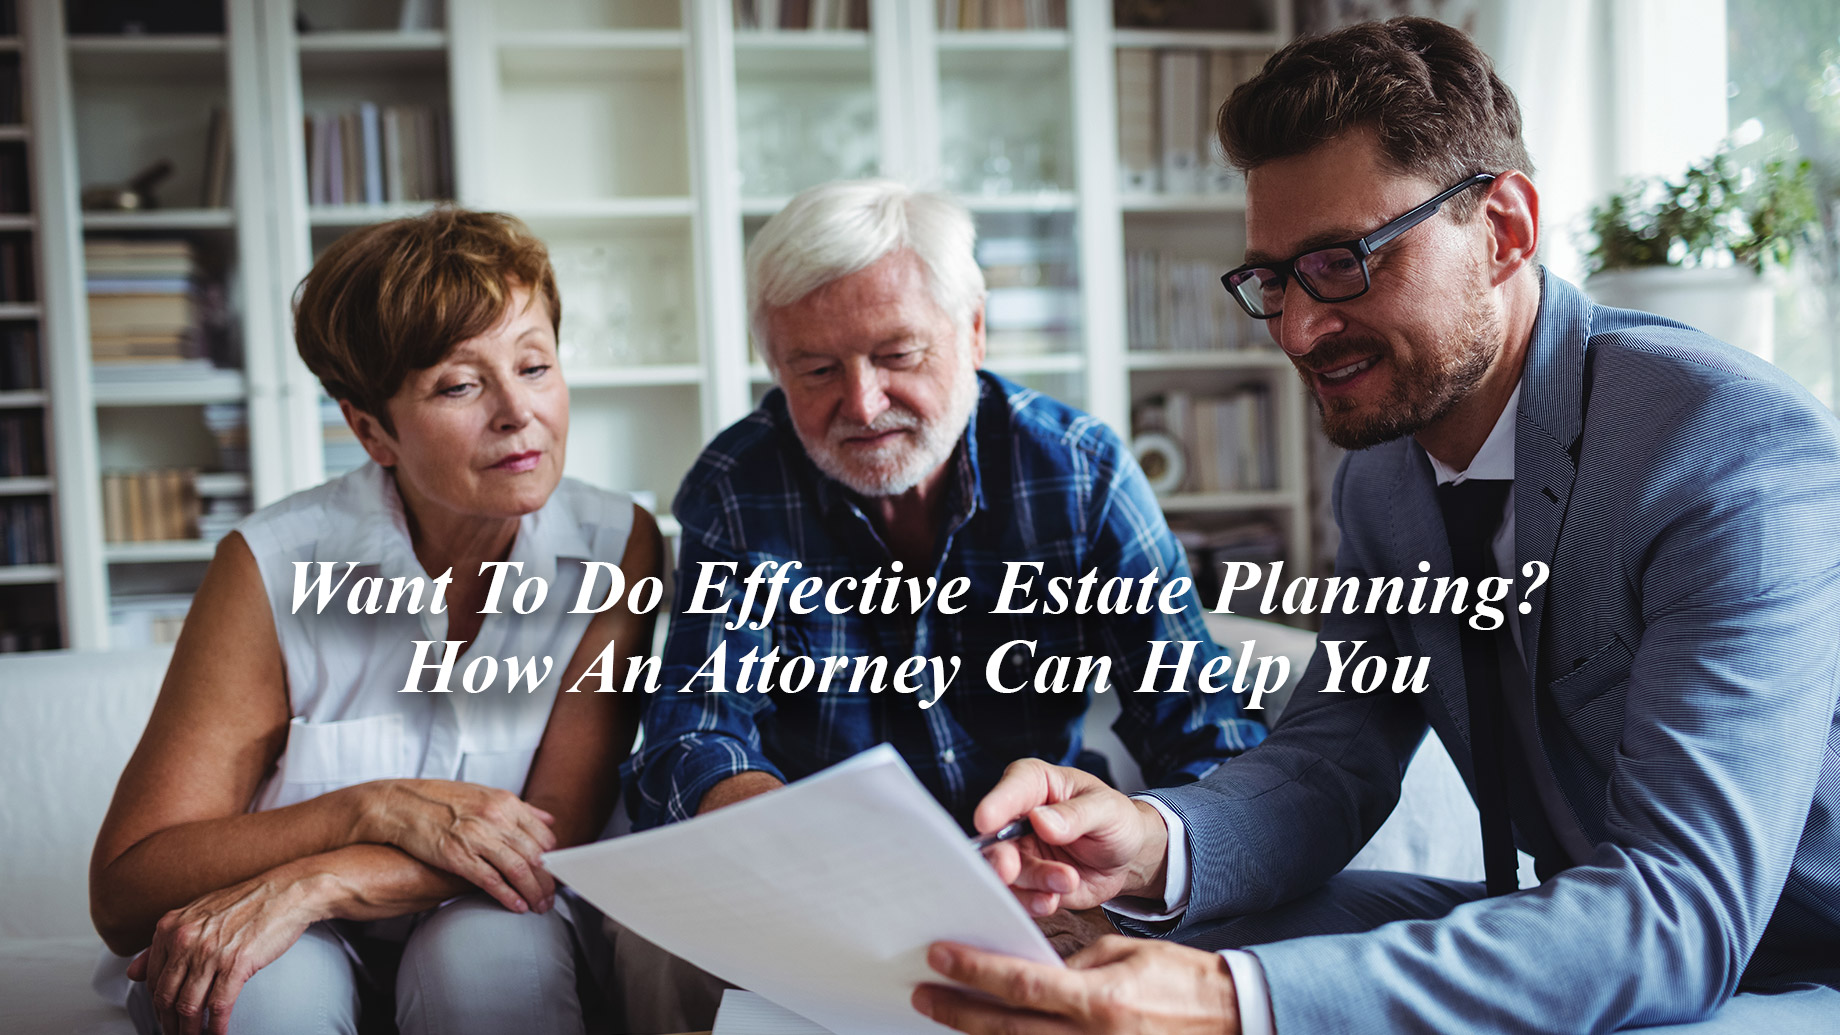 Want To Do Effective Estate Planning? How An Attorney Can Help You